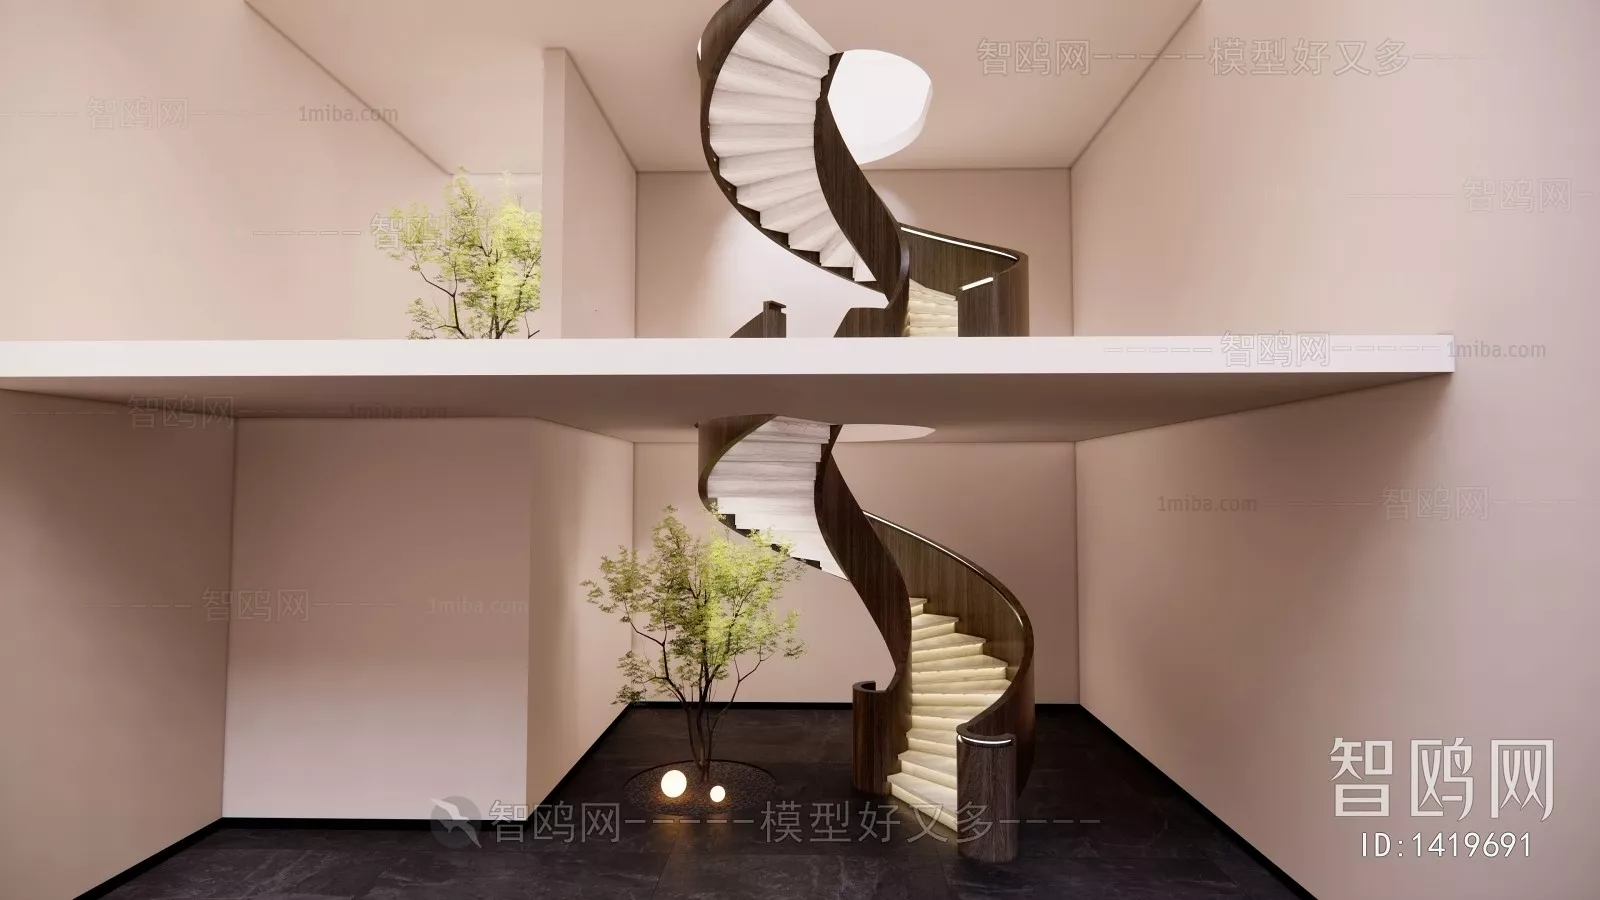 MODERN STAIR - SKETCHUP 3D MODEL - VRAY OR ENSCAPE - ID14312